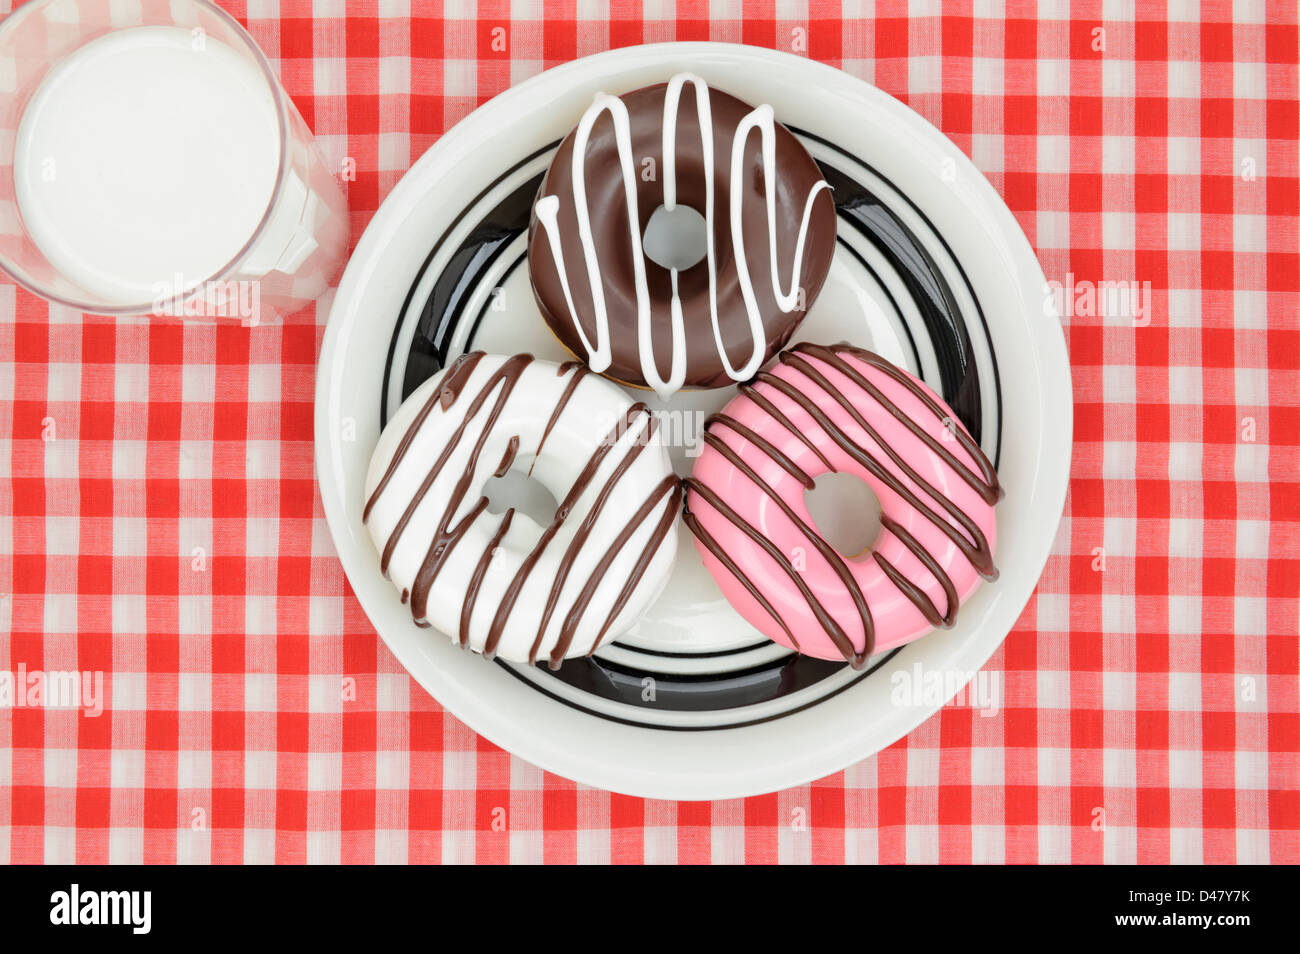 Decorated iced donuts on a white plate, with a glass of milk, on a red-and-white checkered, picnic tablecloth, studio shot taken from above. Stock Photo